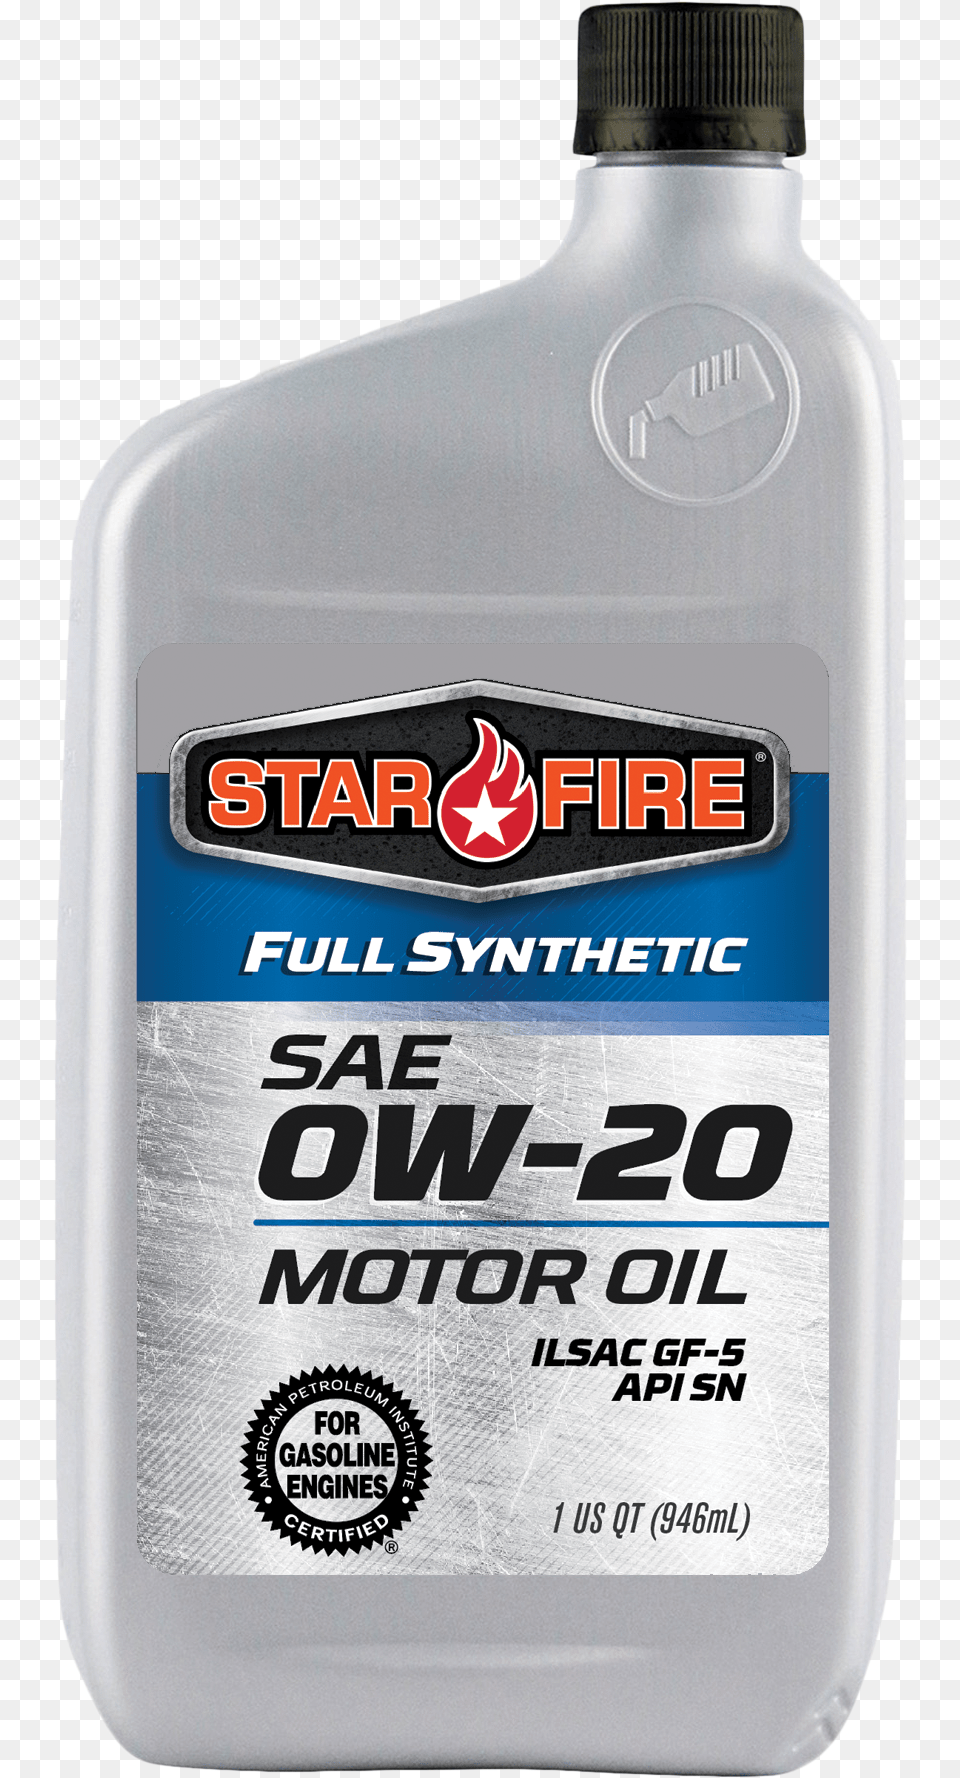 Starfire Full Synthetic Motor Oil 0w20 Oil Starfire, Bottle, Aftershave, Cosmetics, Perfume Png Image